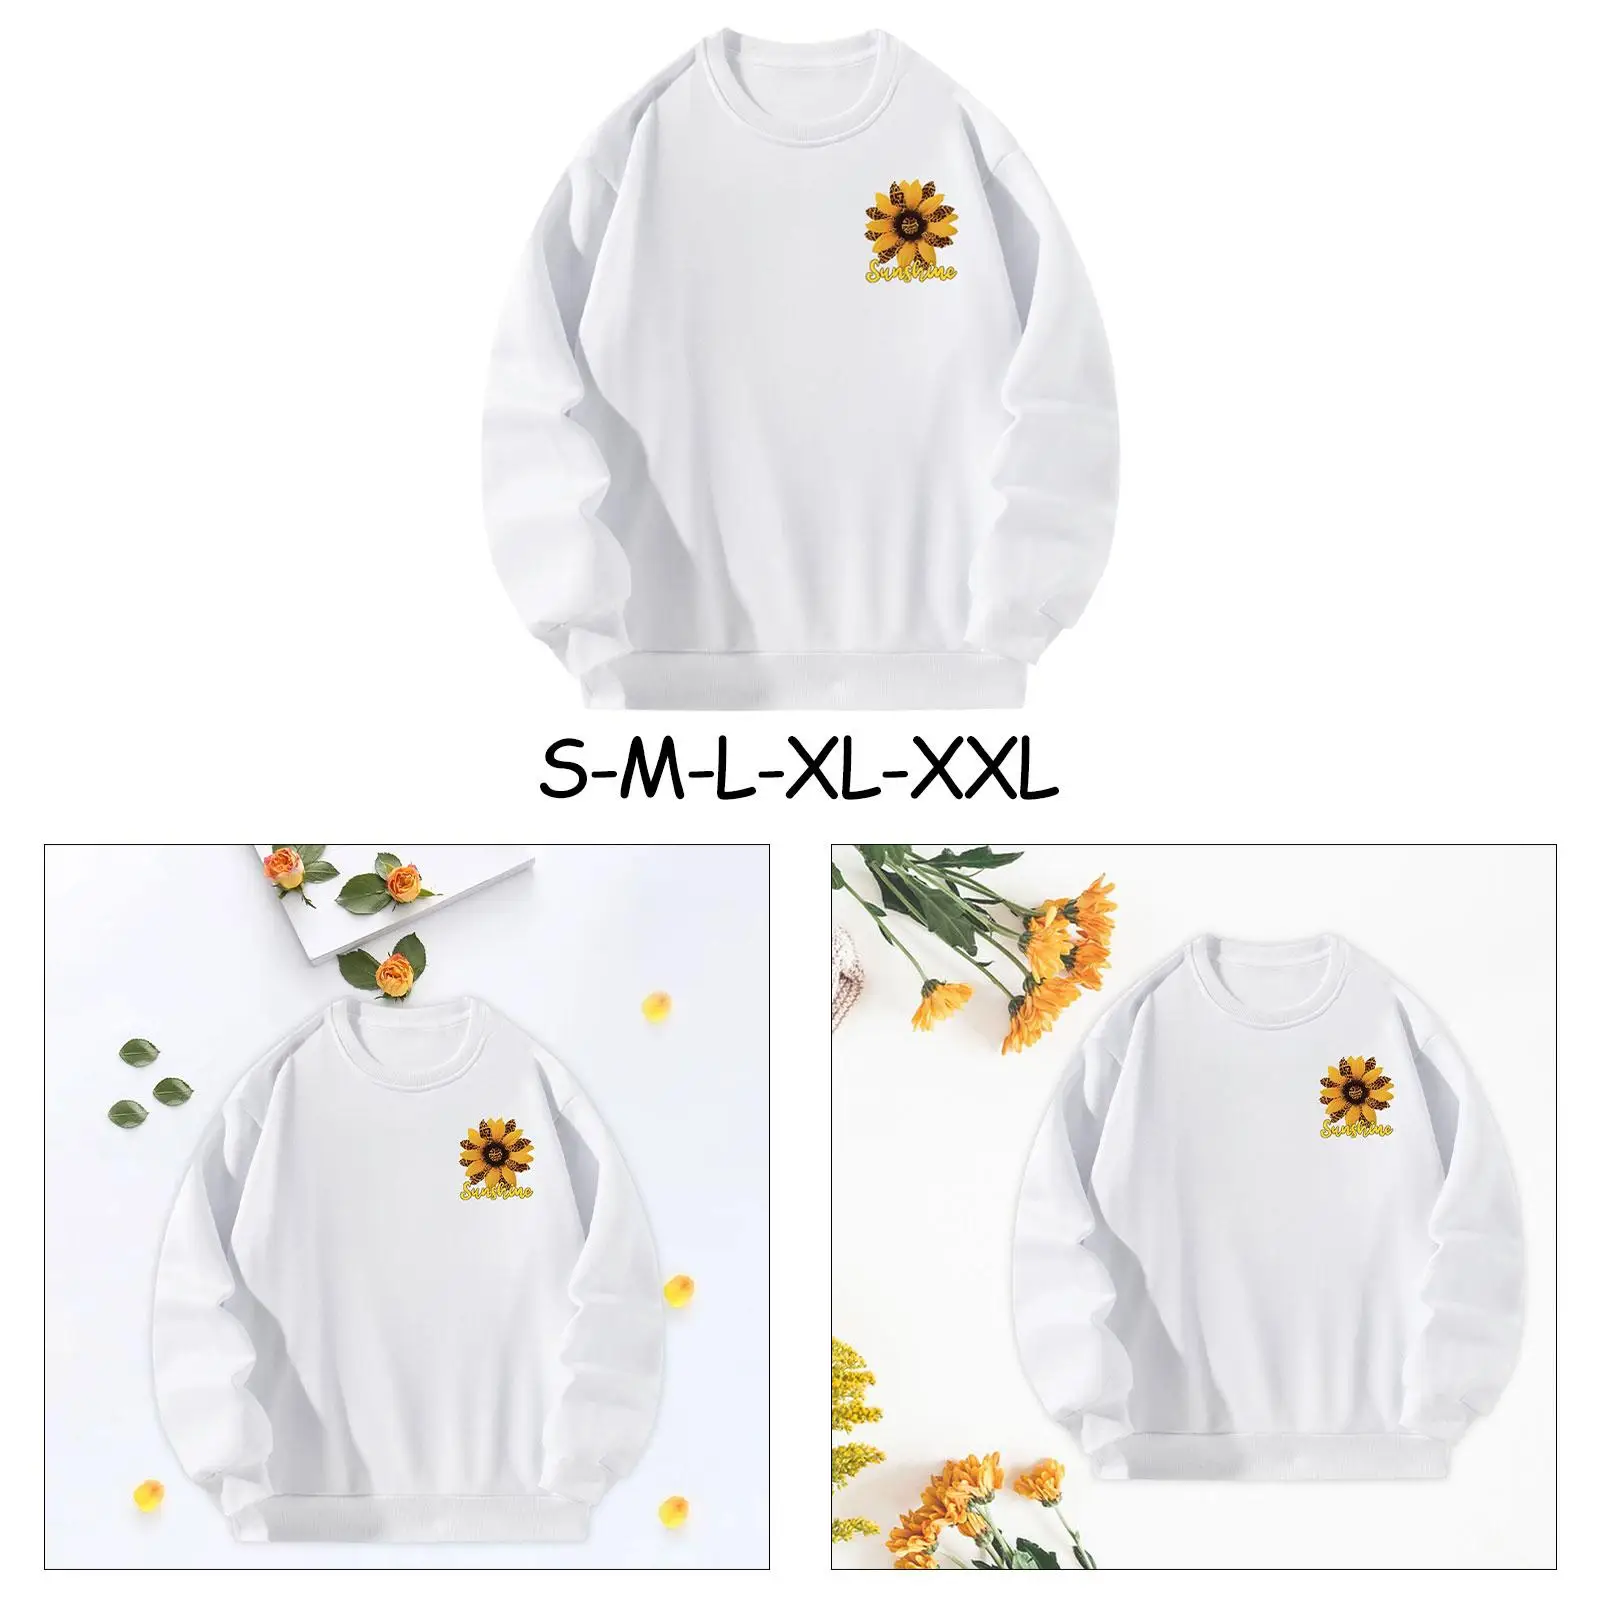 Sweatshirt for Women Printed Activewear Polyester Trendy Crewneck Sweatshirt for Going Out Daily Wear Shopping Sports Vacation